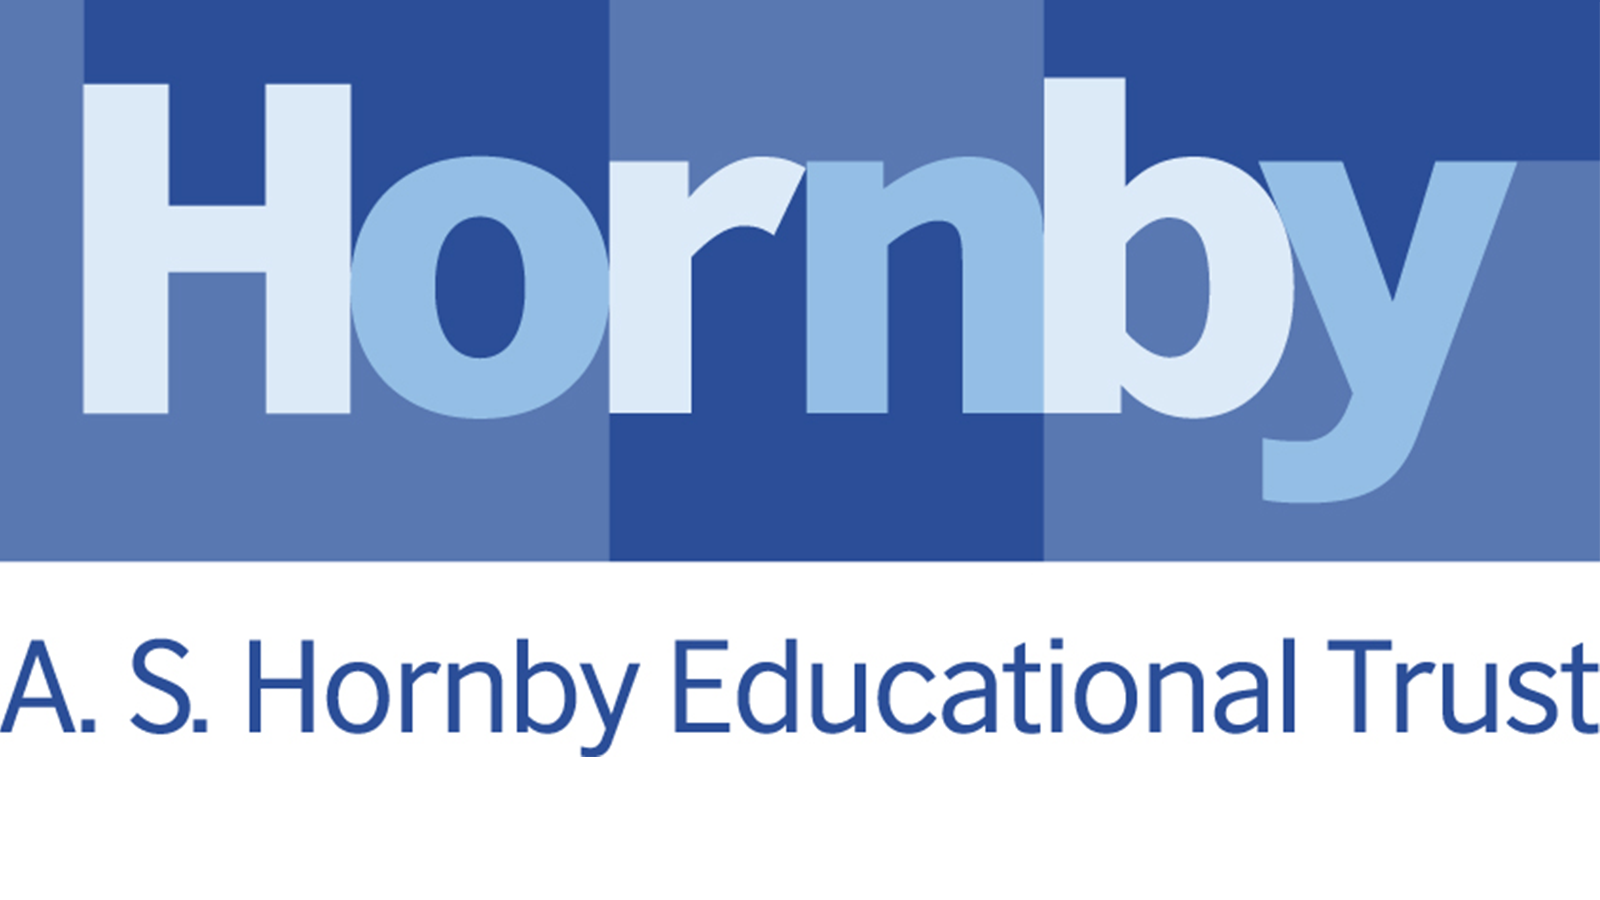 General knowledge about the A.S. Hornby Educational Trust Scholarship